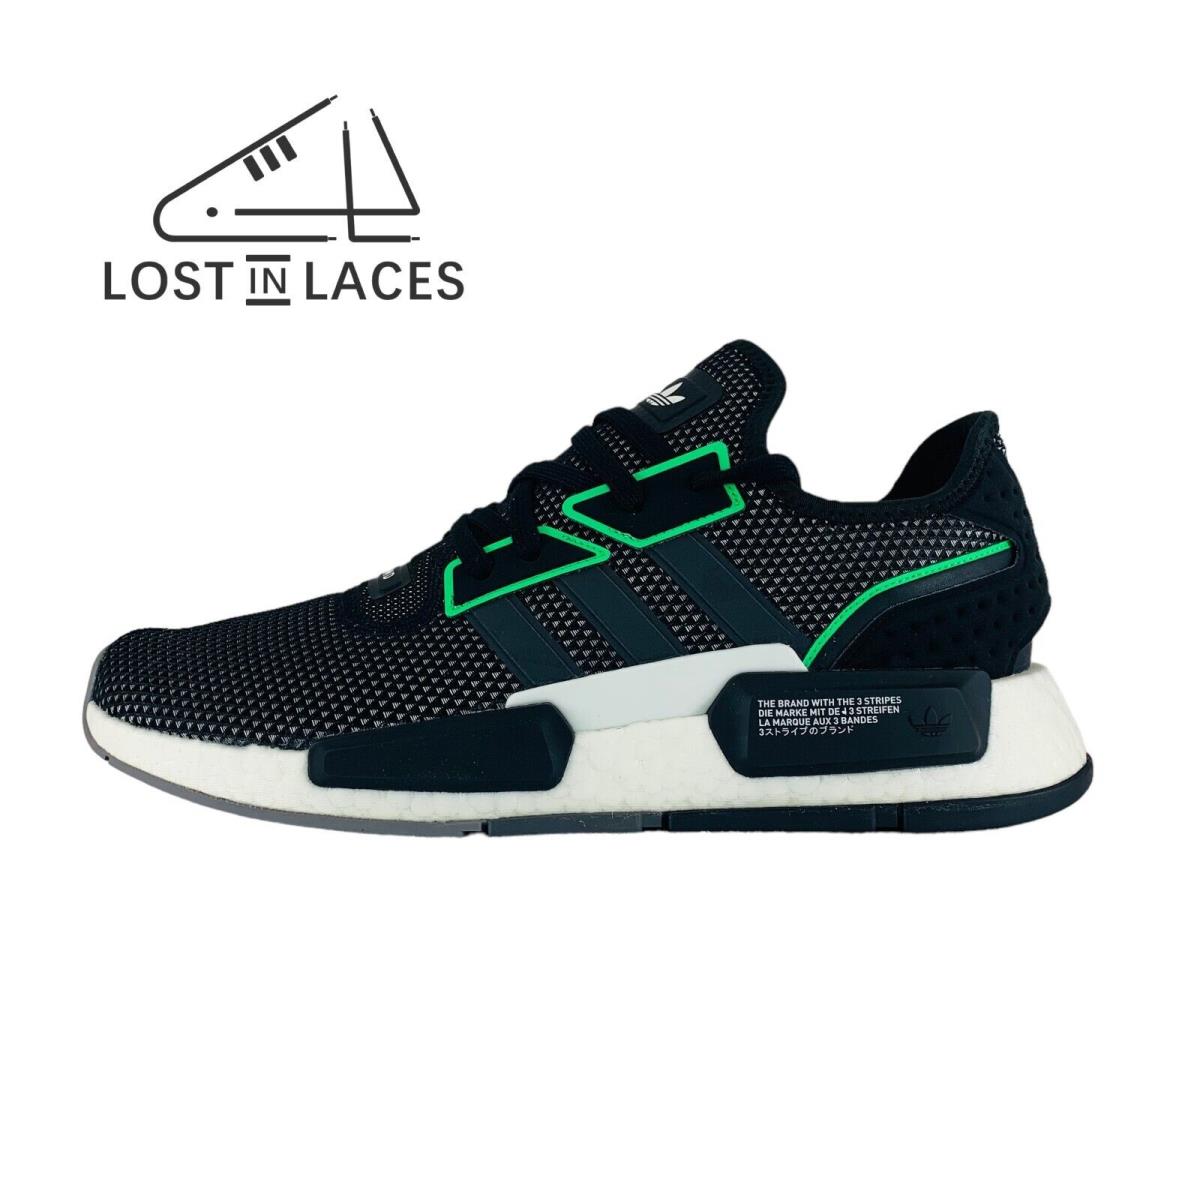 Adidas NMD_G1 Black Green Lifestyle Sneakers Men`s Shoes IE4559